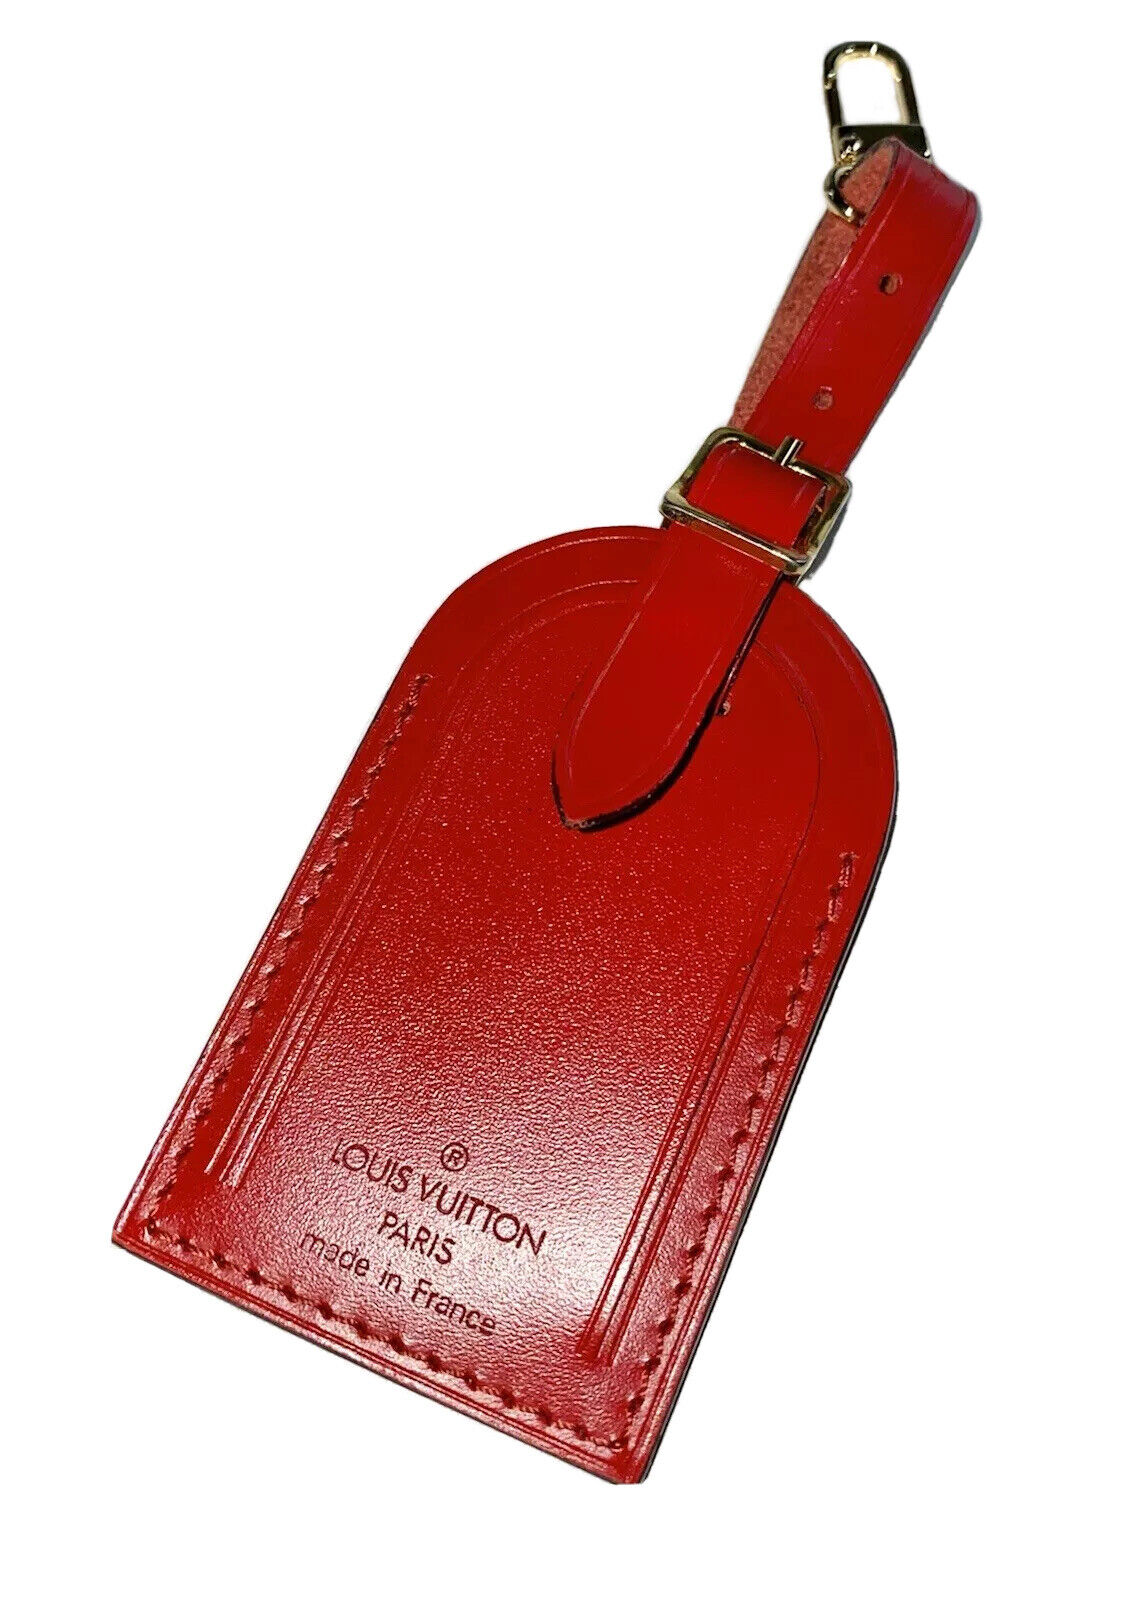 Authentic Louis Vuitton Luggage Bag Tag w/ Strap- “Restored” One Set Large  🇫🇷